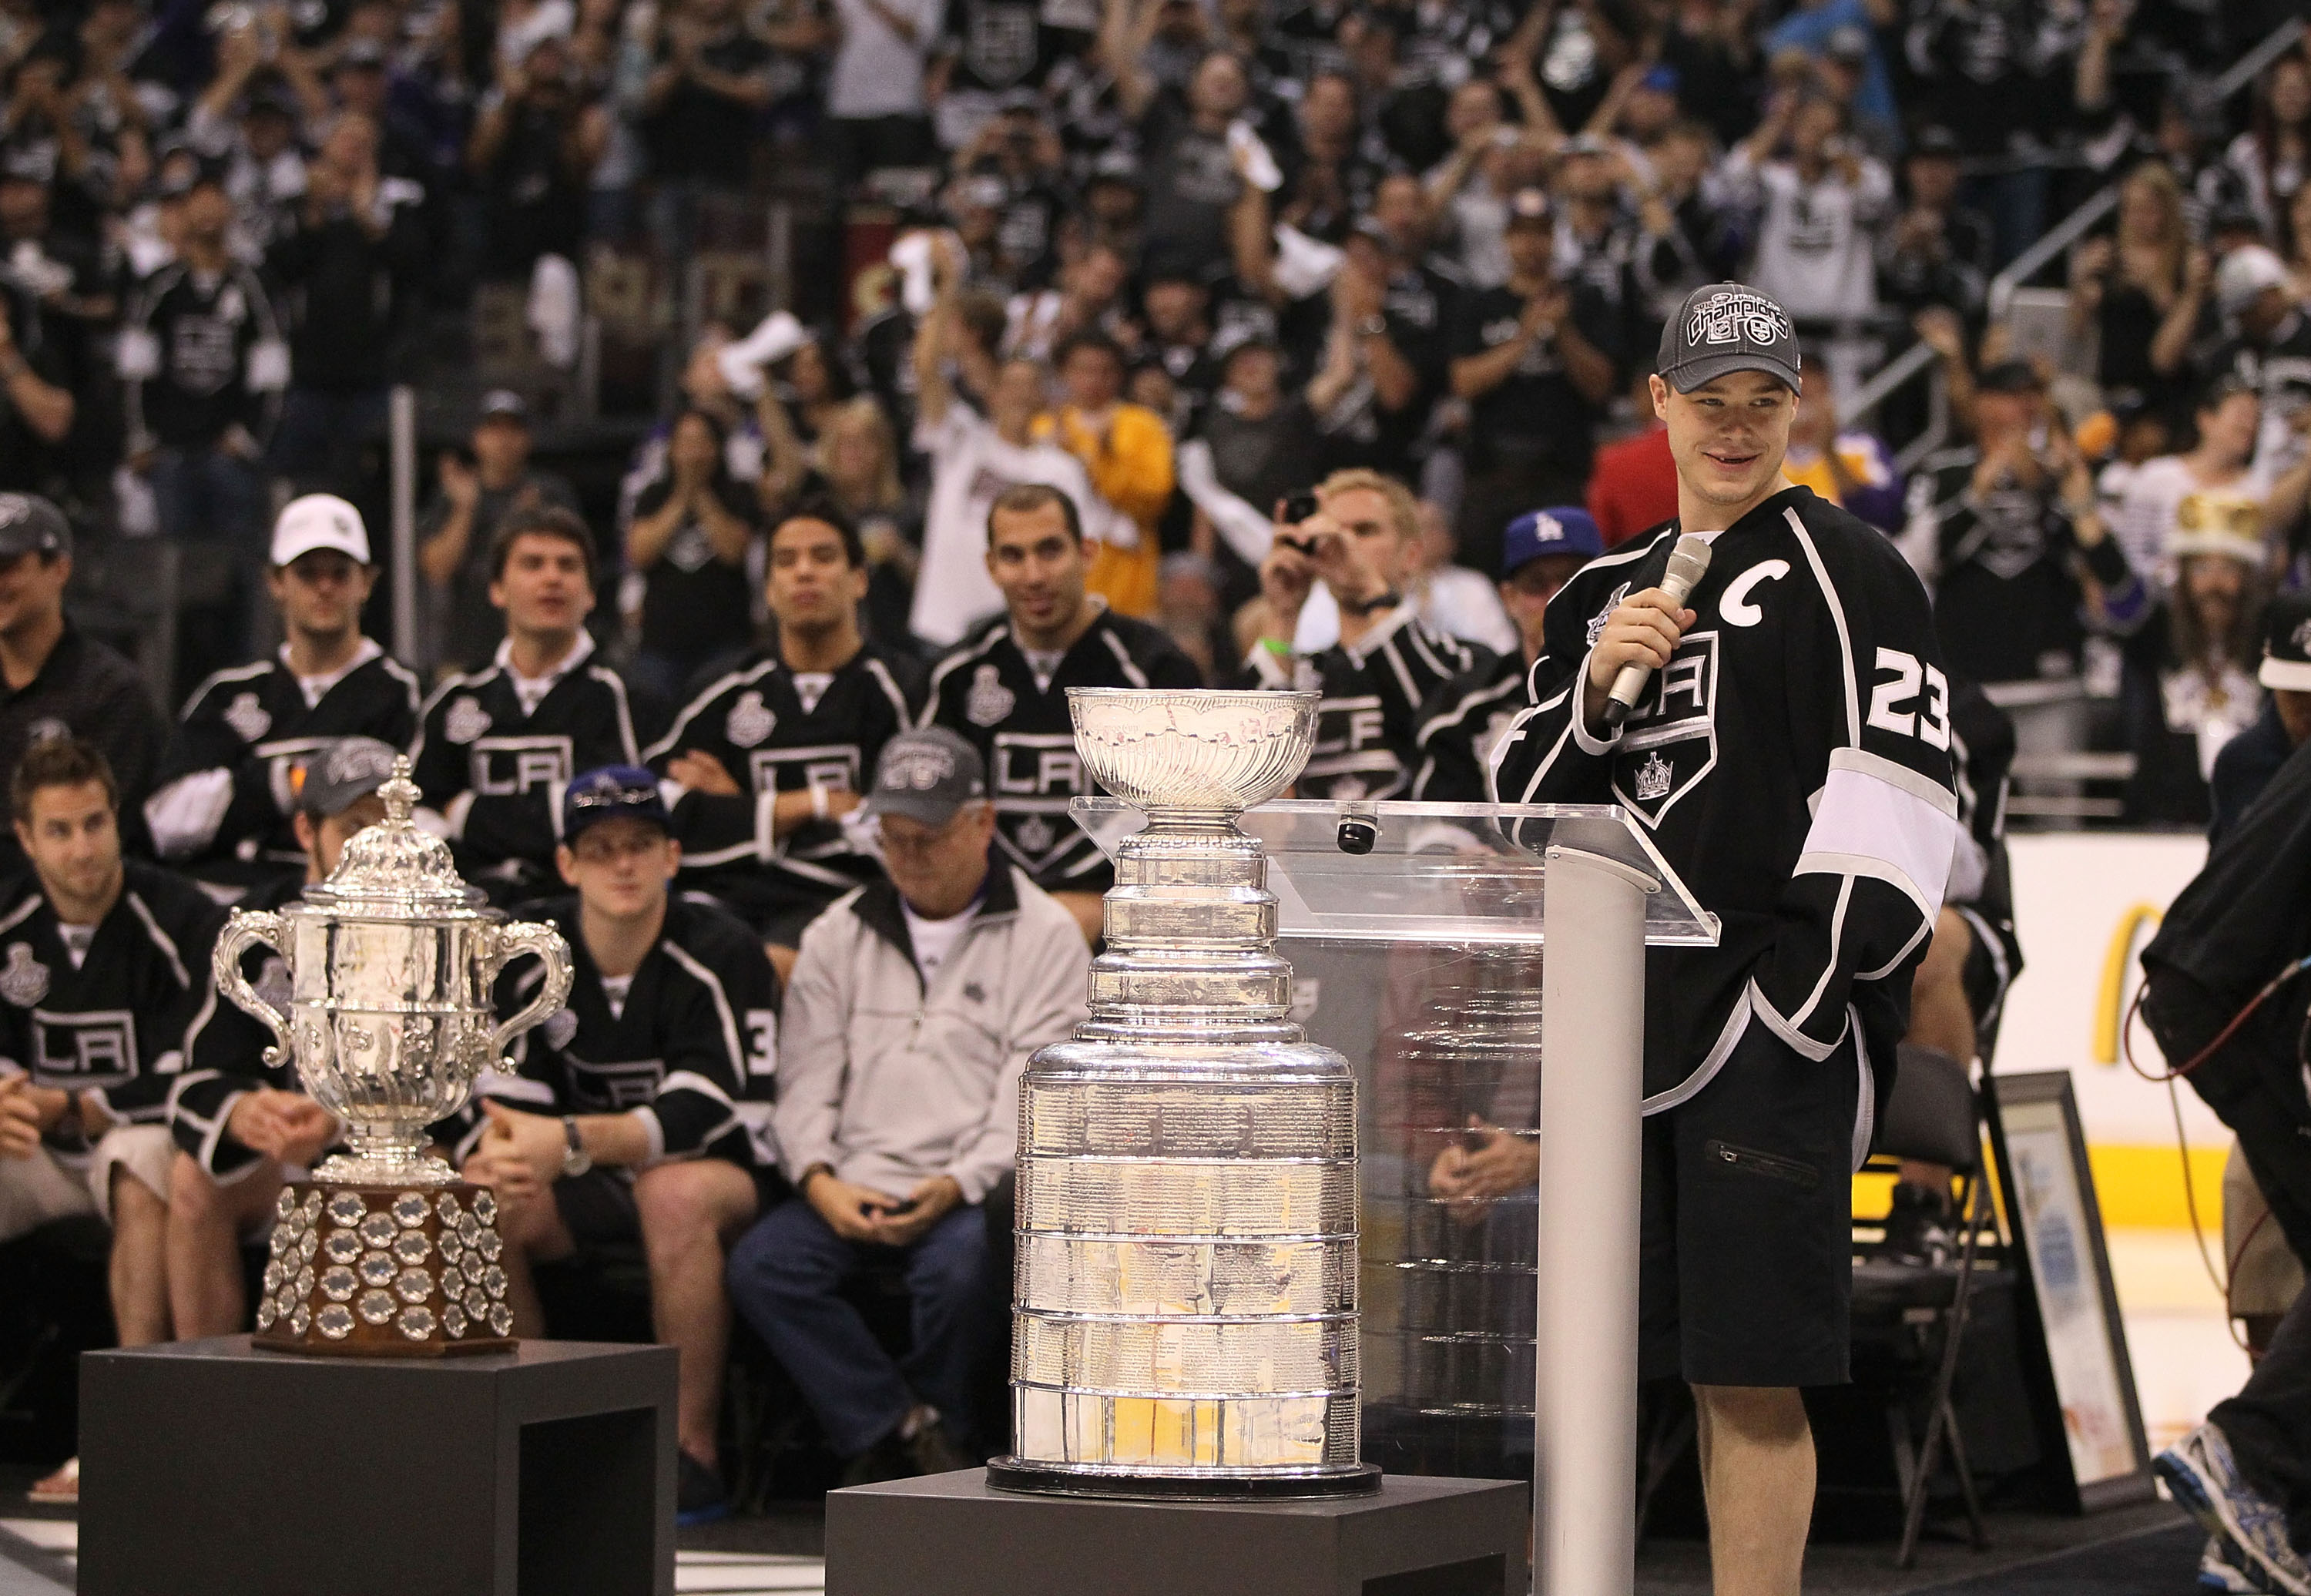 L.A. Kings Fans Celebrate The Team's Stanley Cup Victory - LA Kings Insider